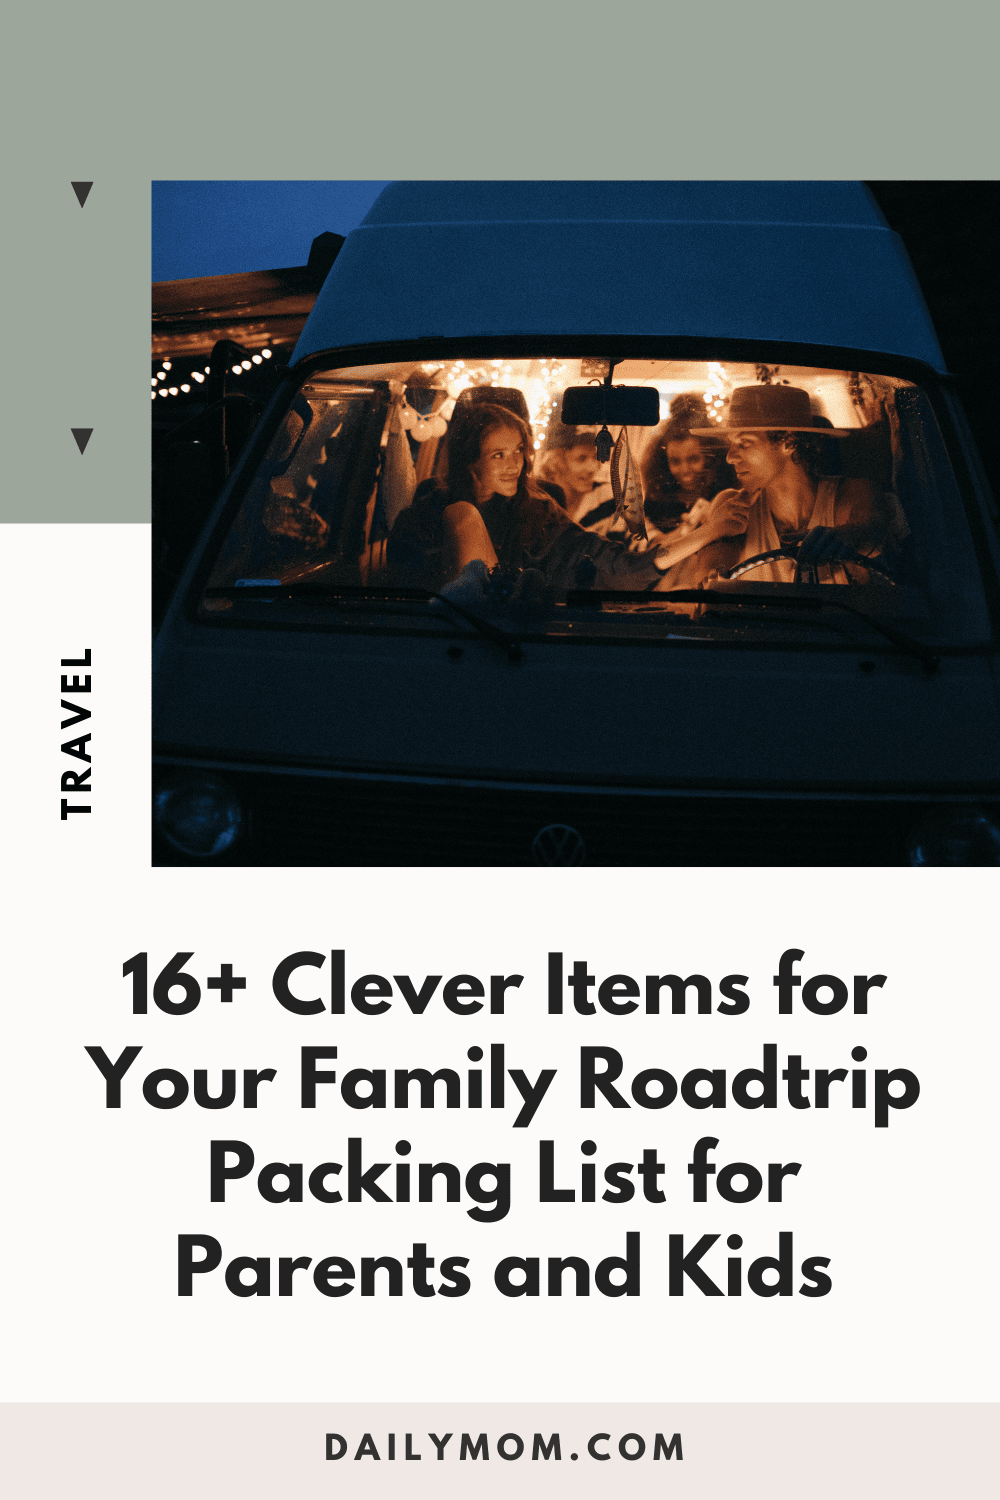 daily-mom-family-road-trip-packing-list